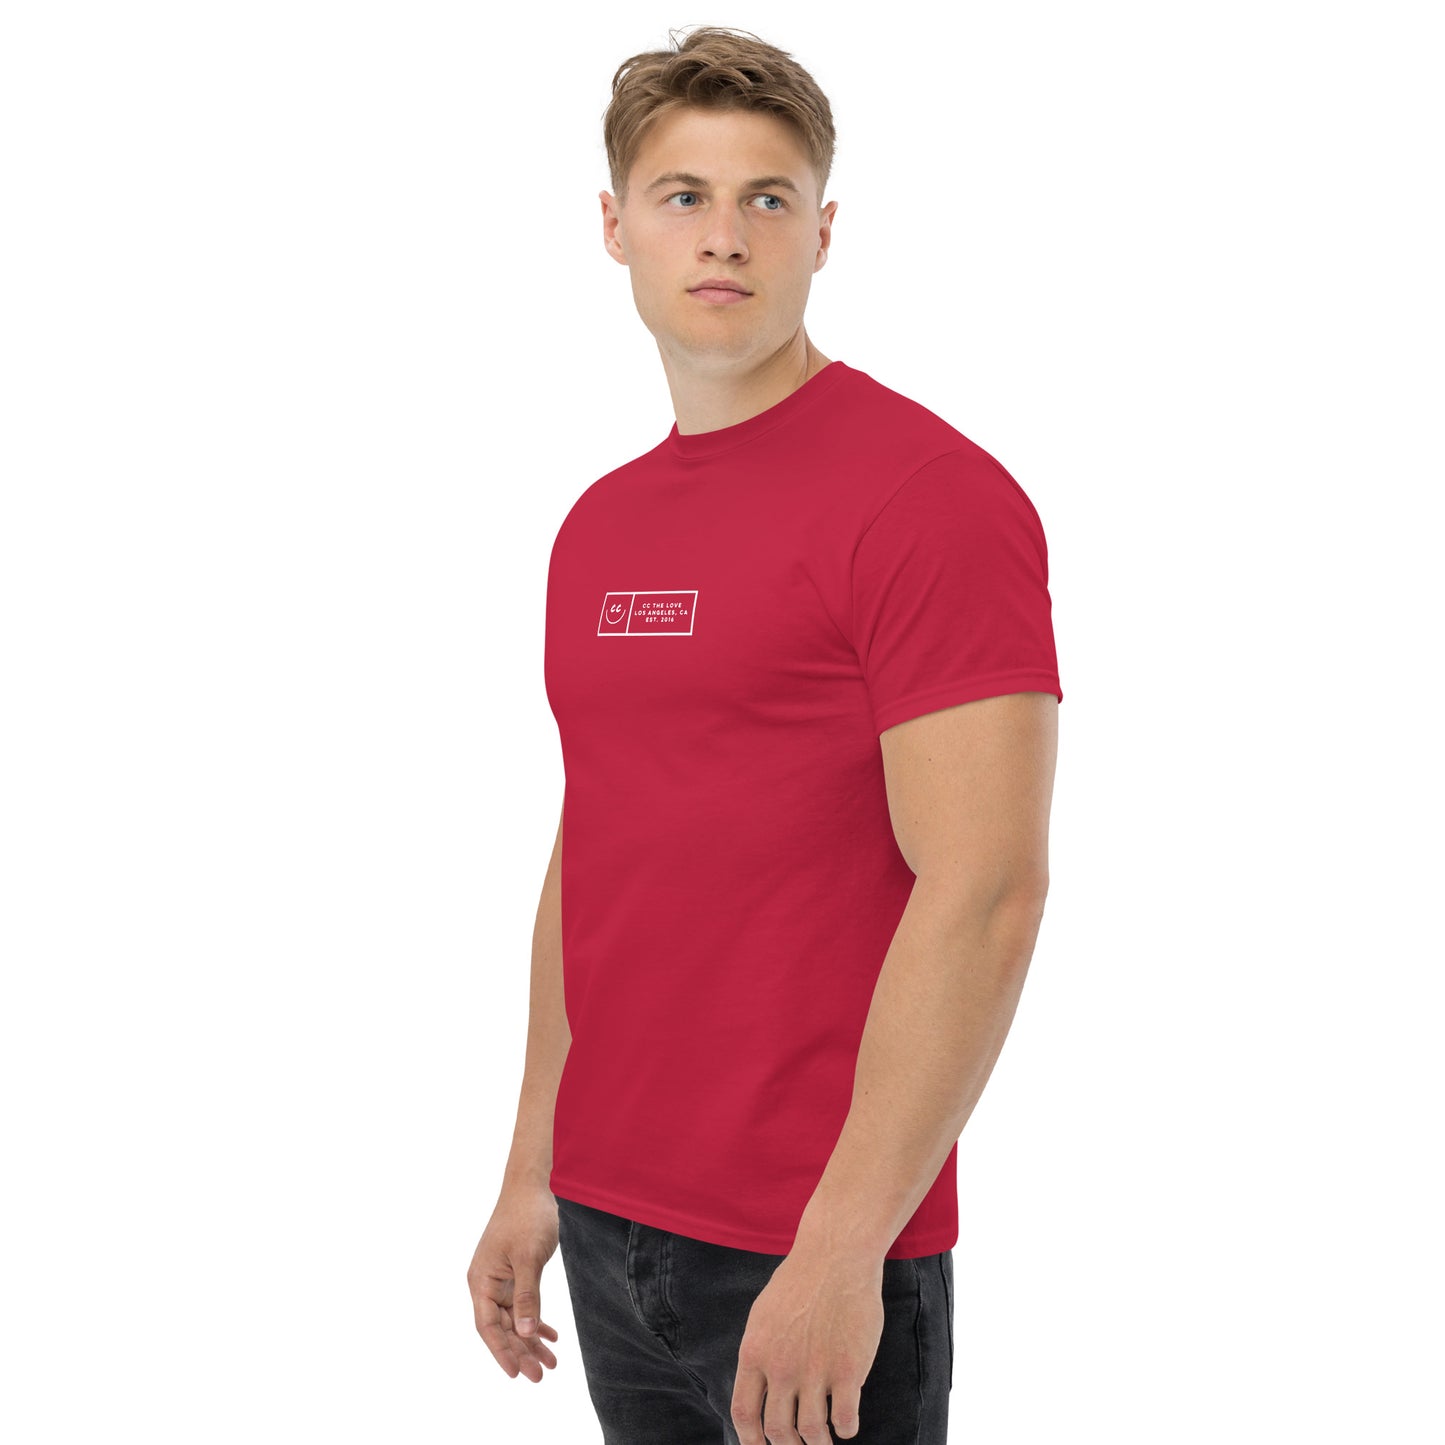 Boxed Smile Tee in Cardinal - Short Sleeve